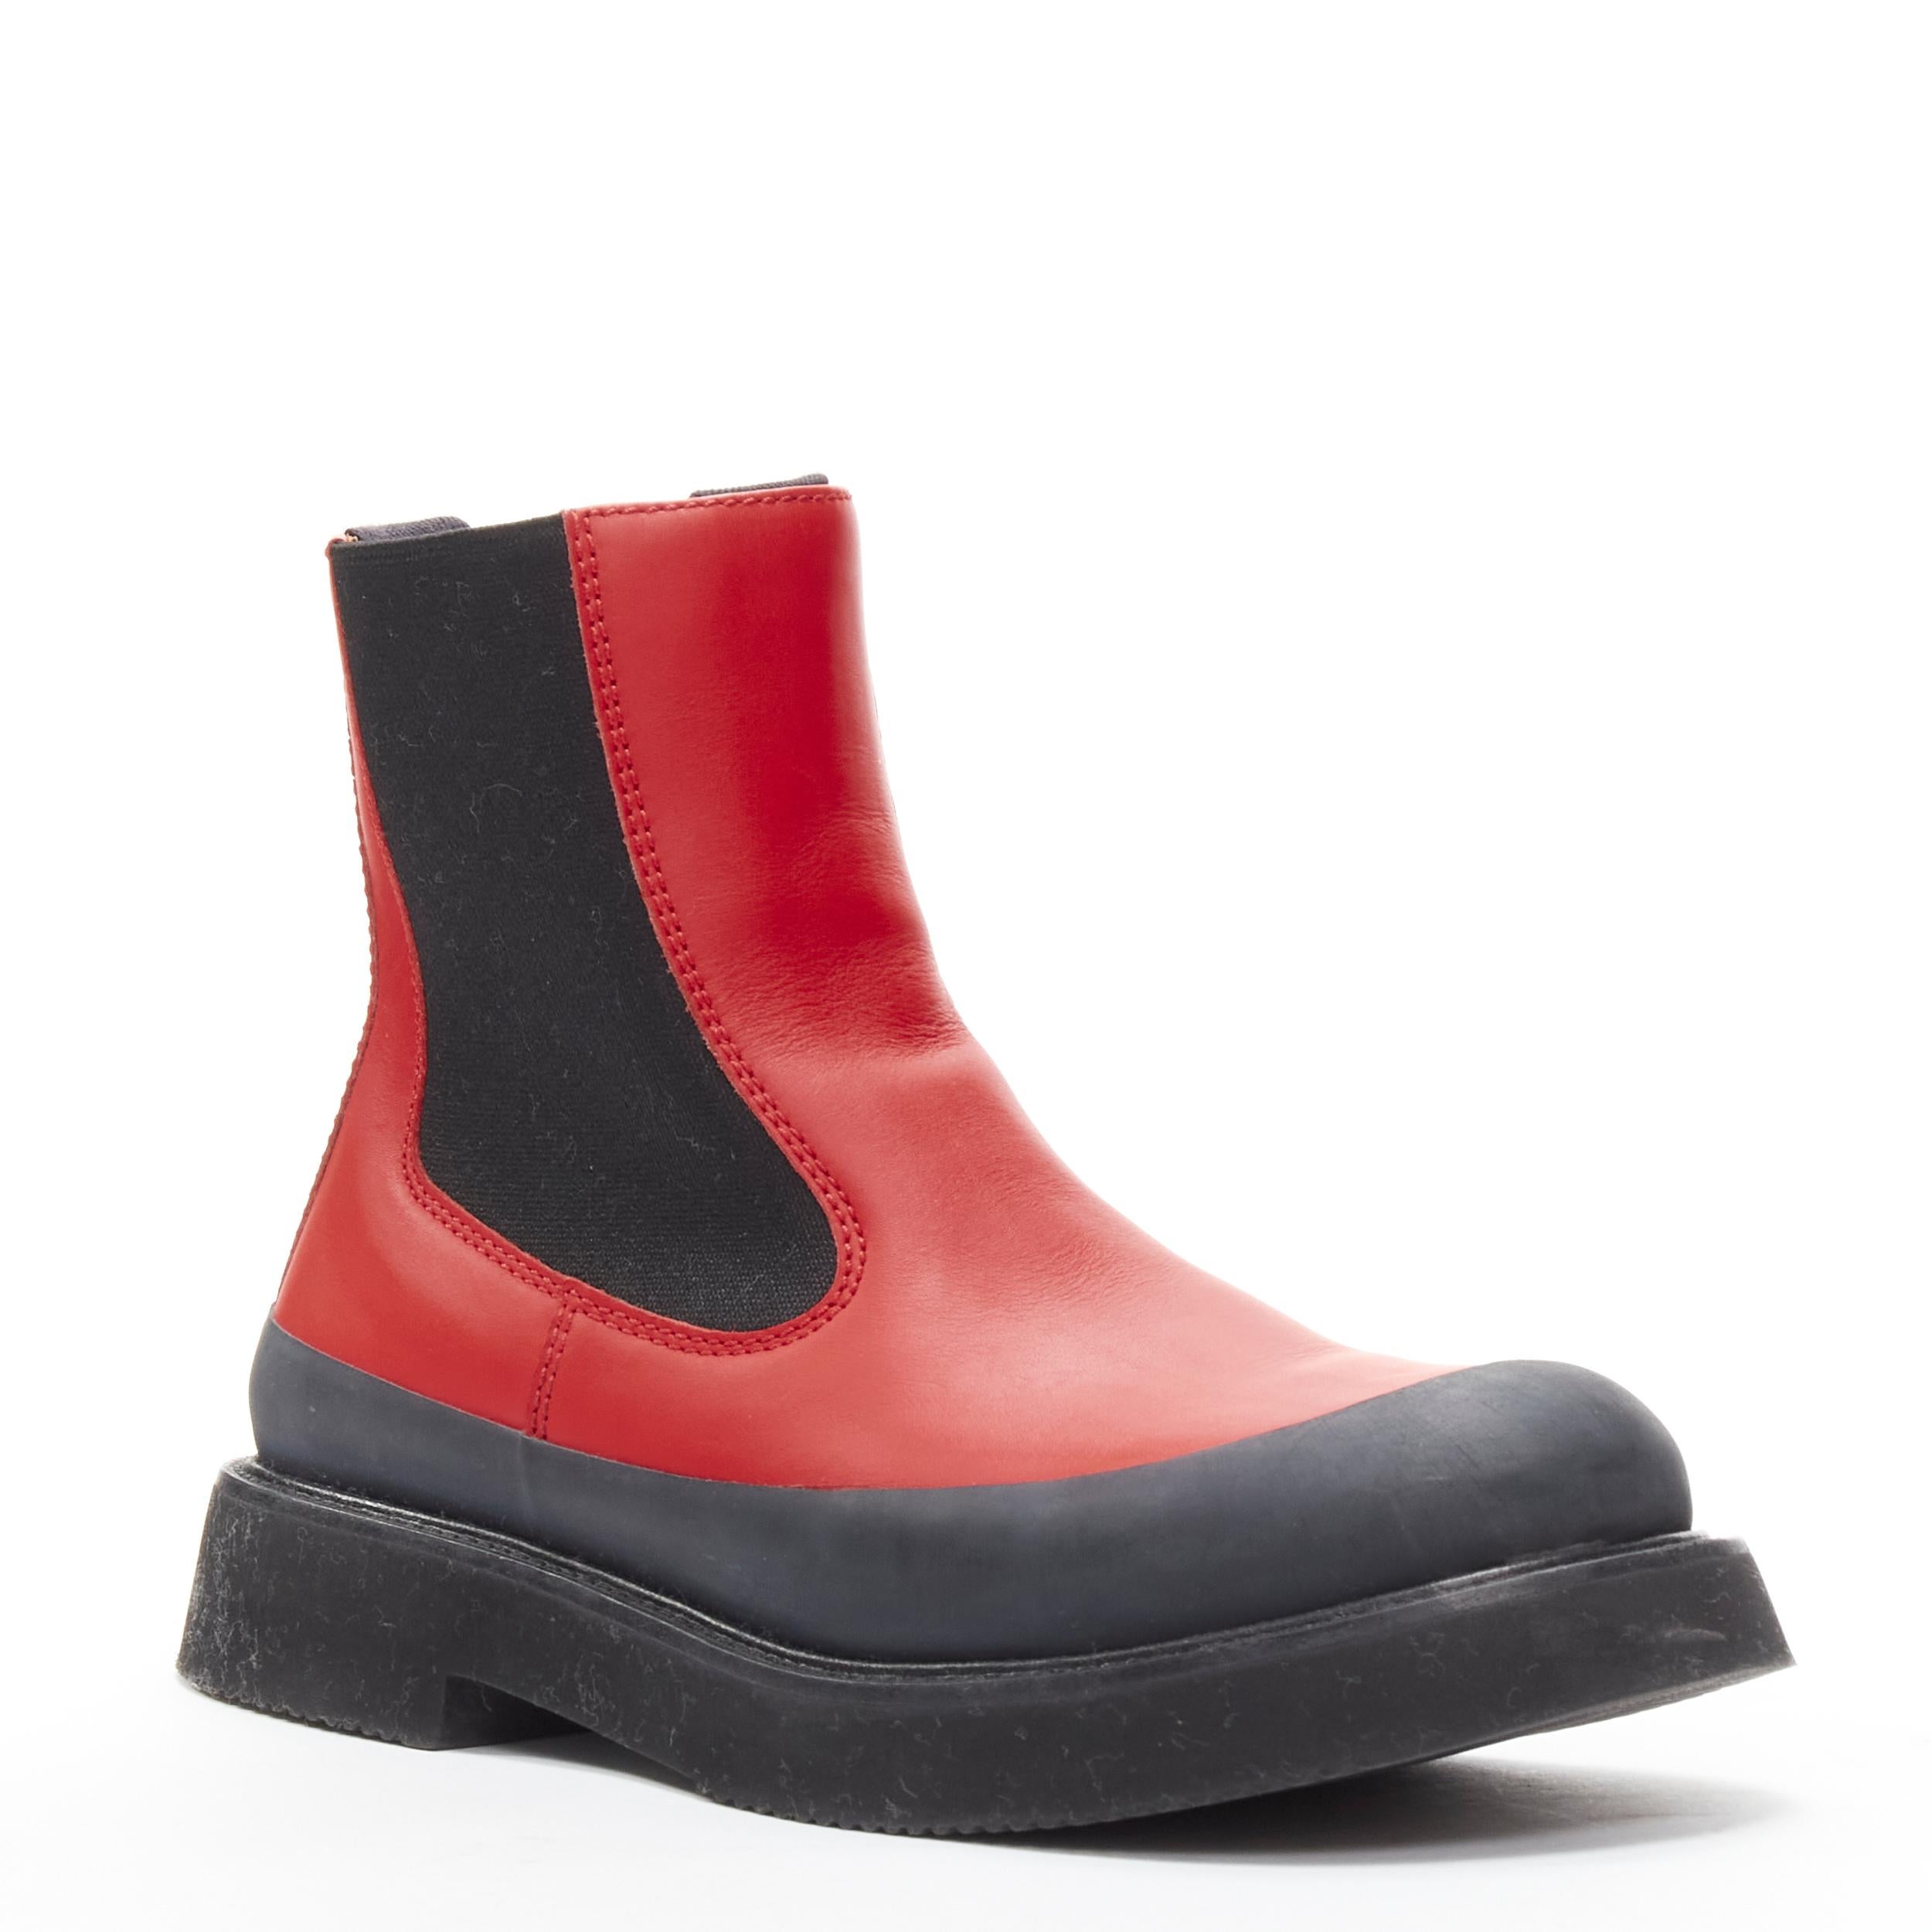 OLD CELINE Phoebe Philo Country red leather black rubber chunky ankle boot EU37
Brand: Celine
Designer: Phoebe Philo
Material: Calfskin Leather
Color: Red
Pattern: Solid
Extra Detail: Red leather upper. Rubberised trim around outsole. XL chunky